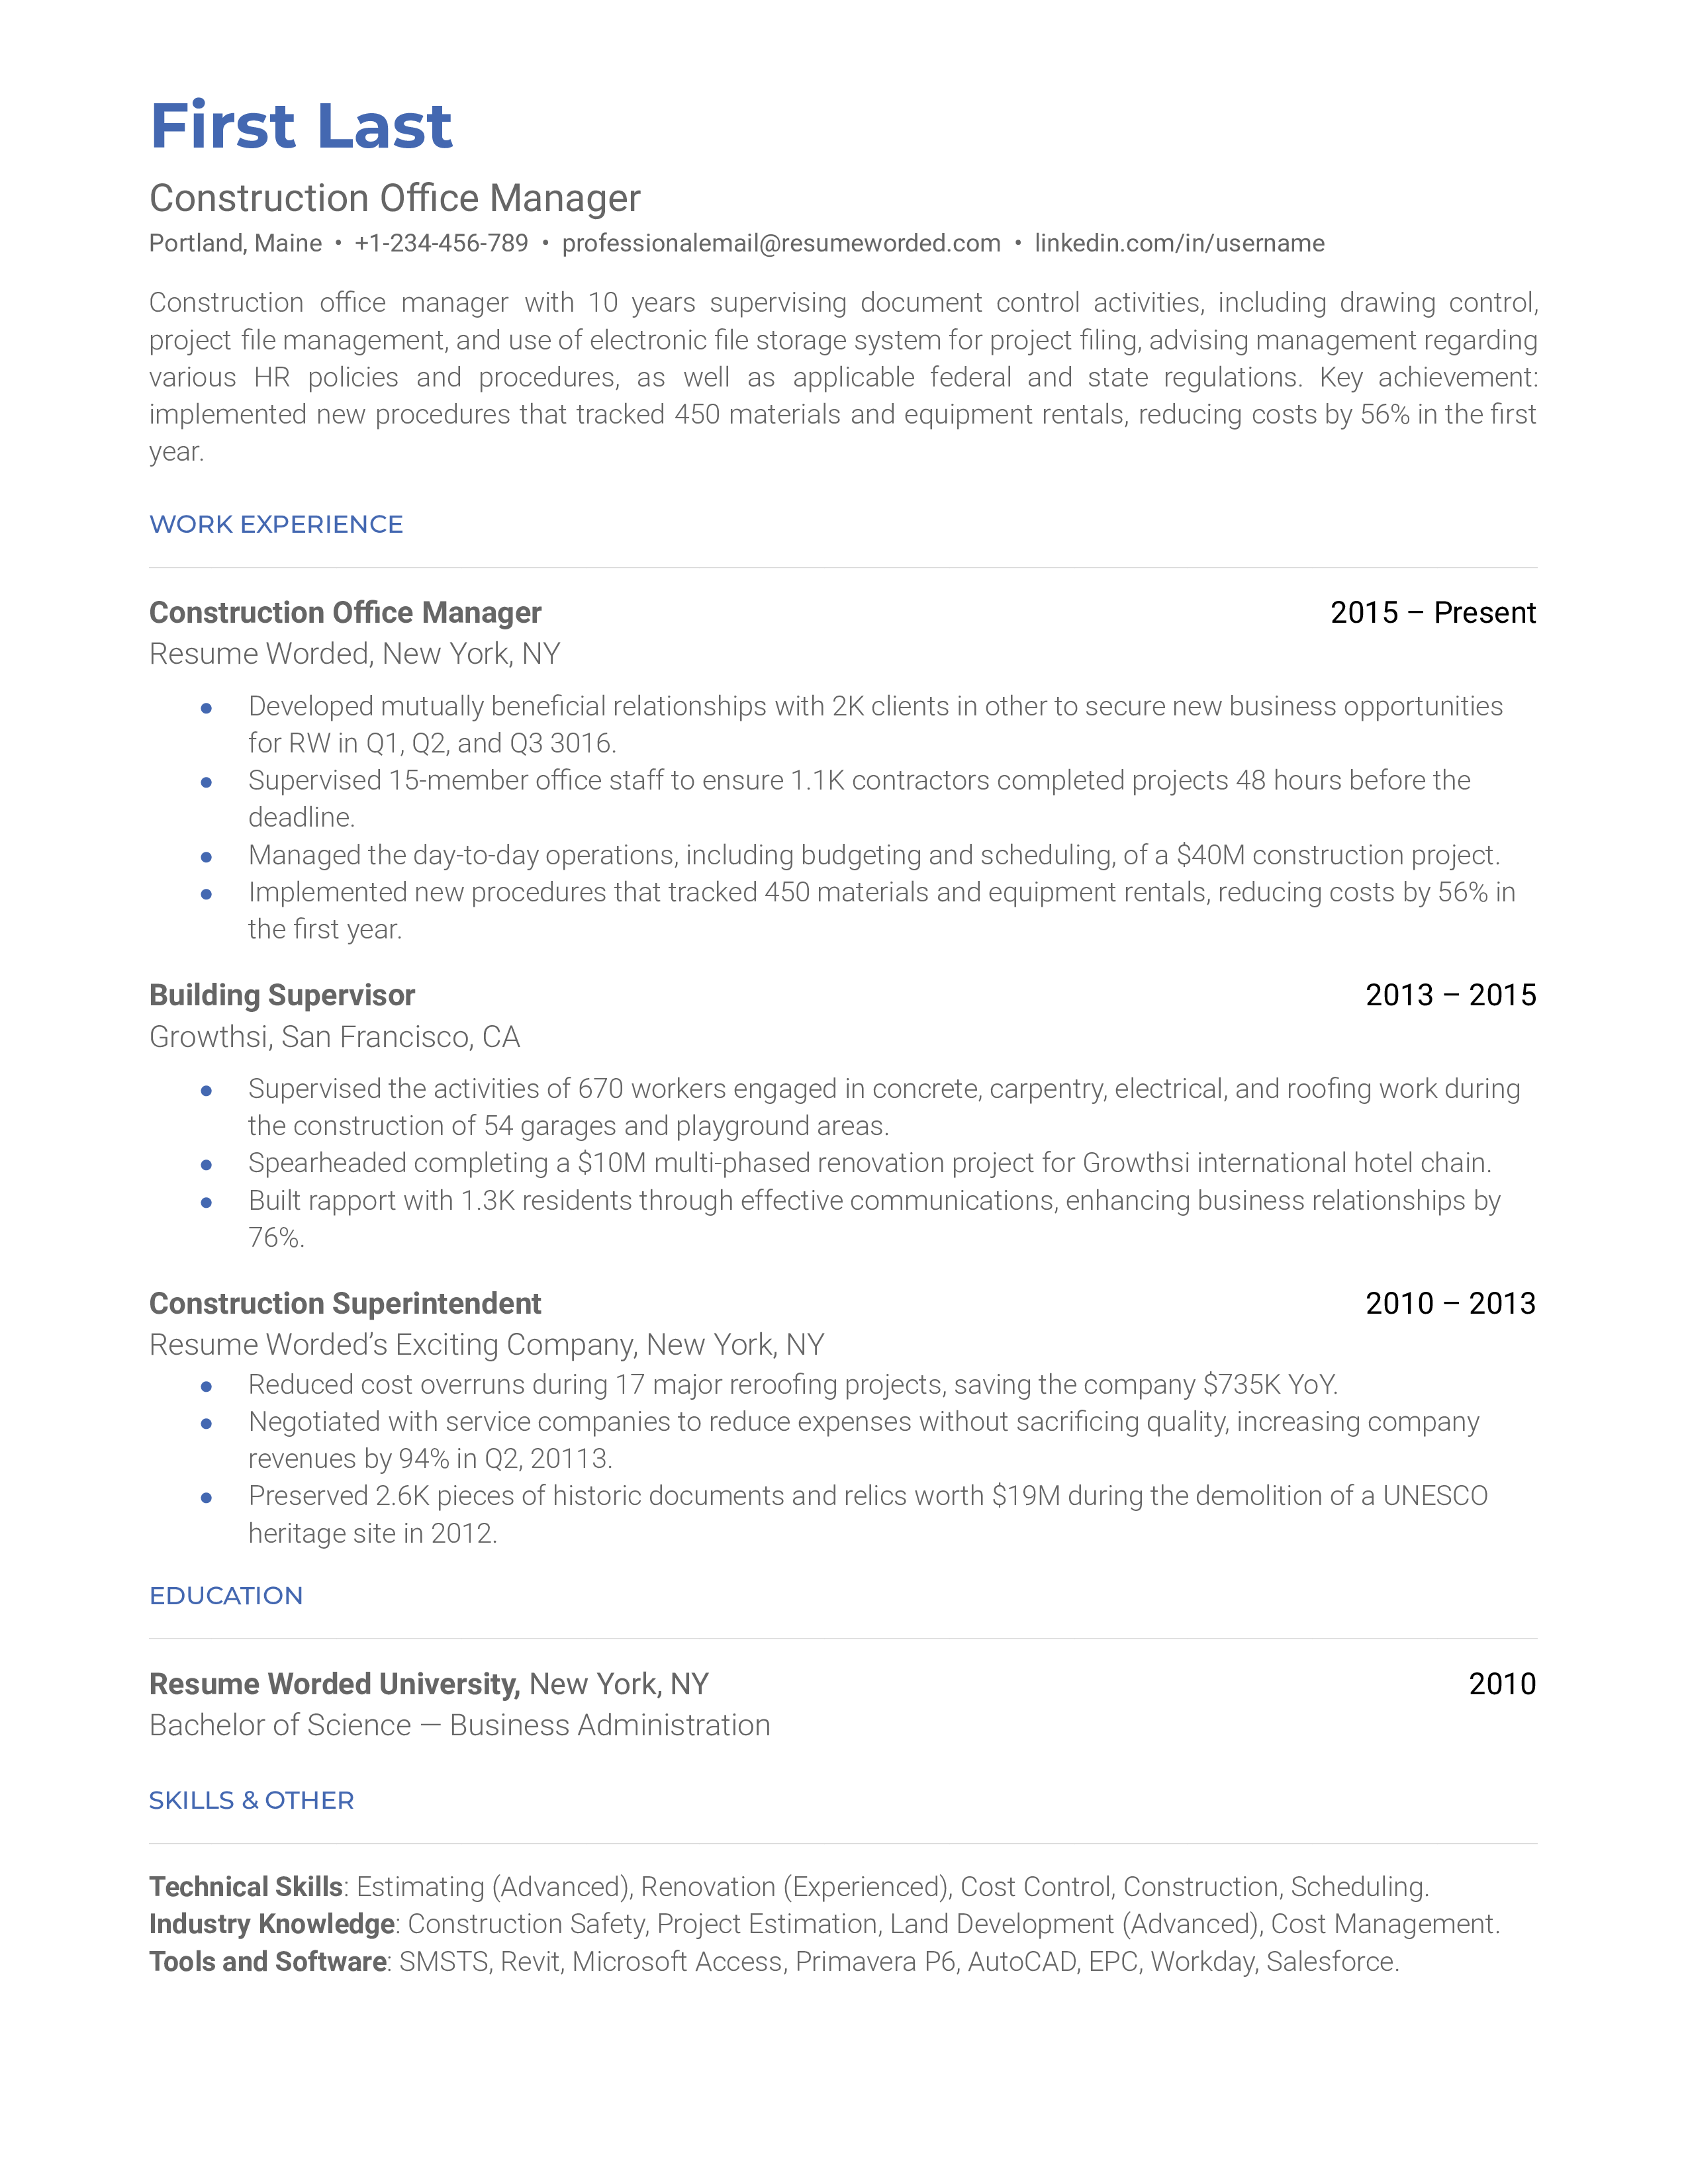 A construction office manager resume sample that highlights the applicant’s construction-specific skills and experience.